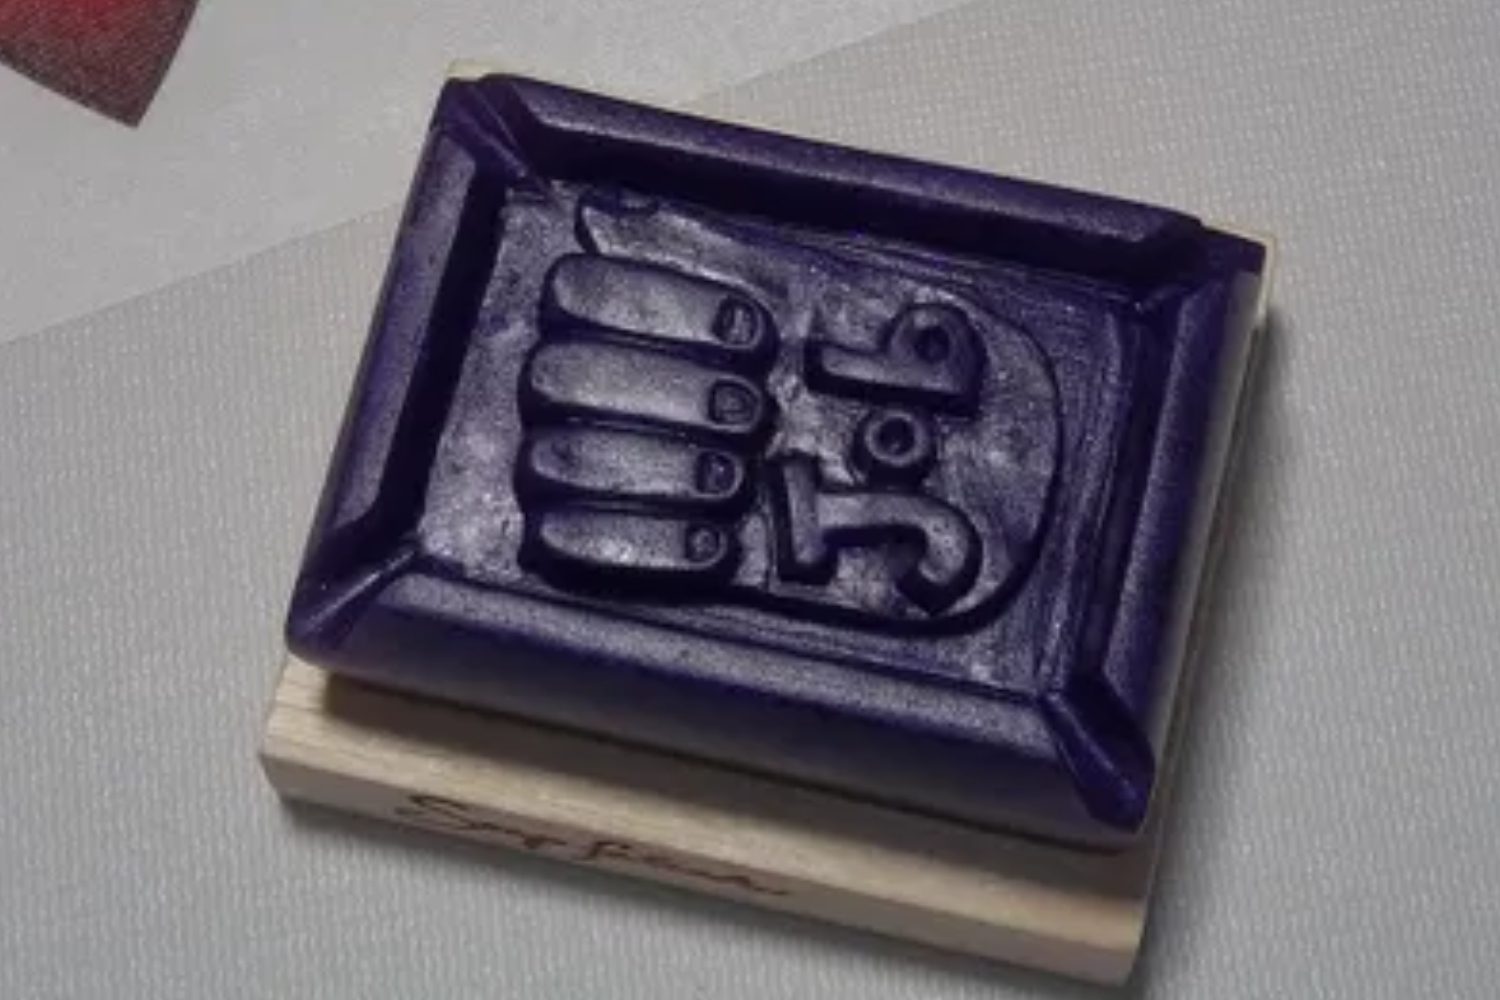 A purple rectangular object with a picture of a hand.